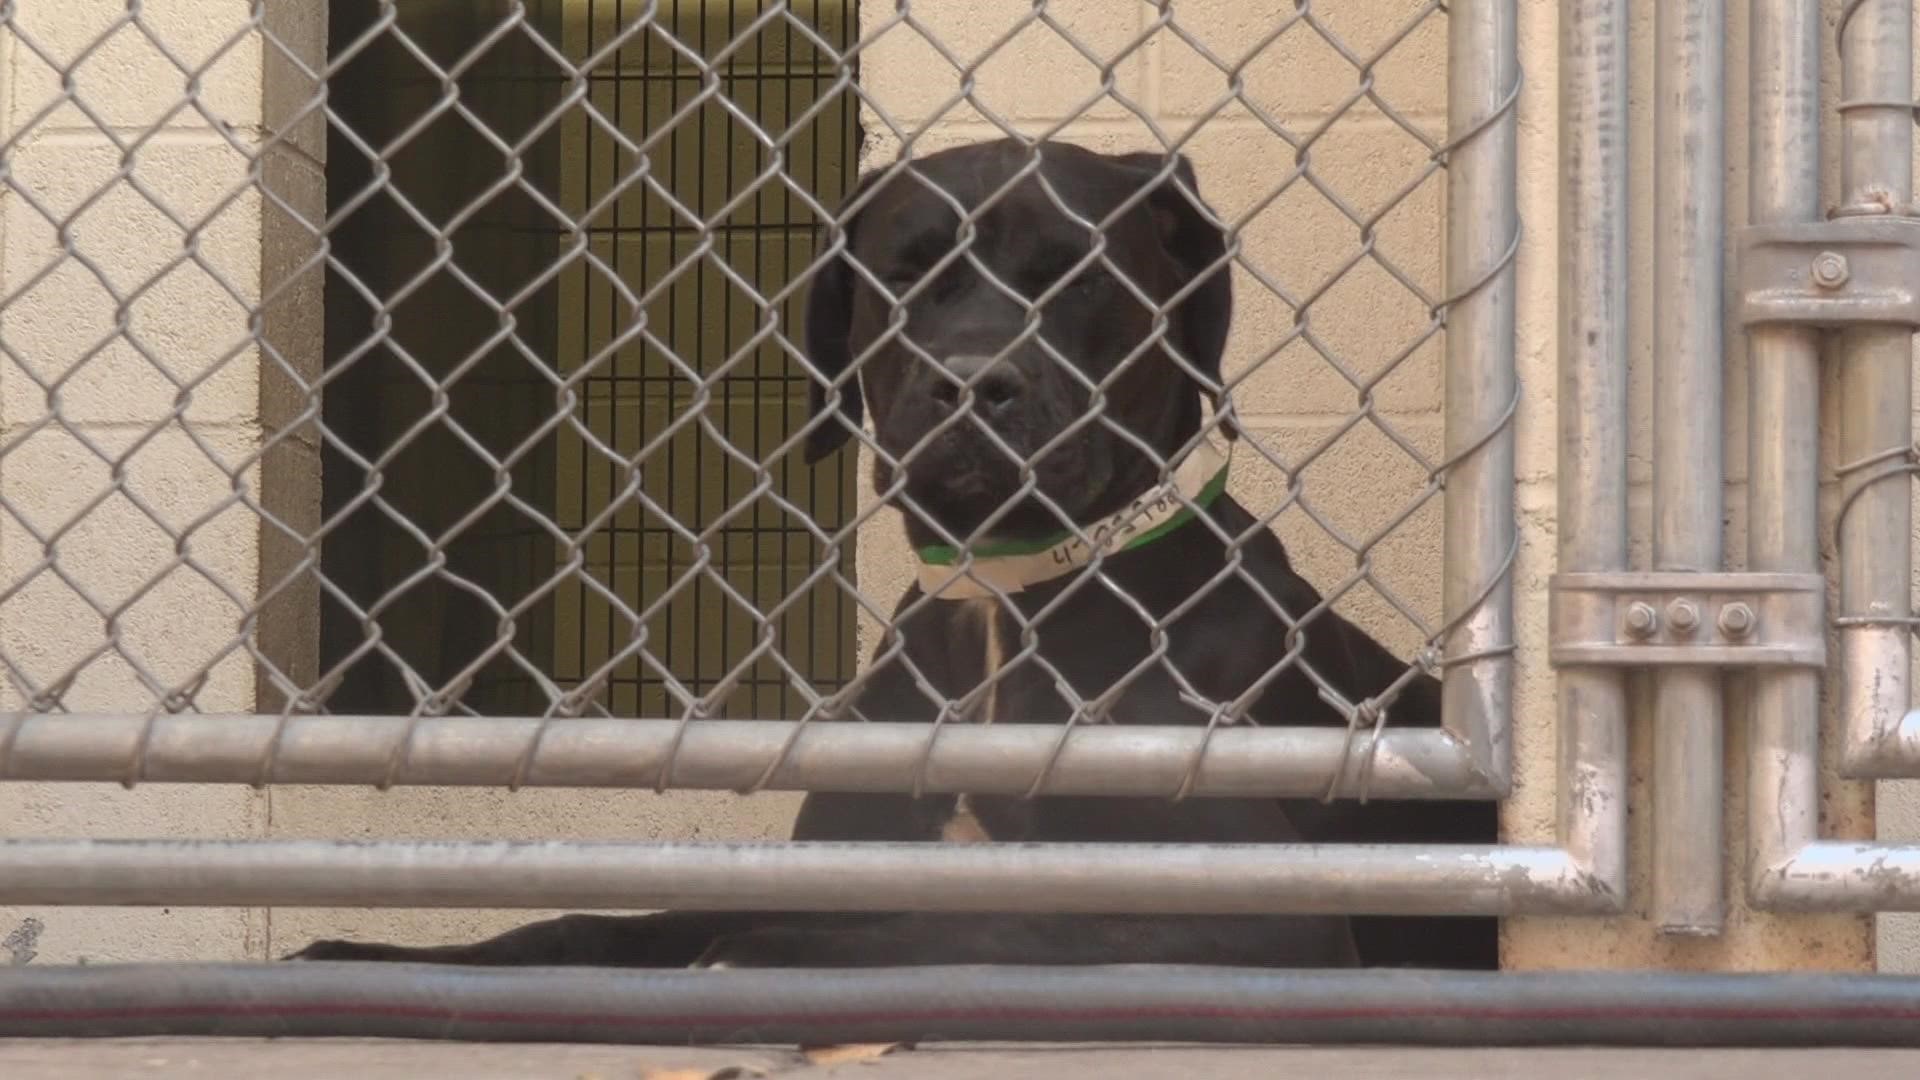 County data shows there's been a 33% increase in pets being surrendered in 2022 compared to the previous year.